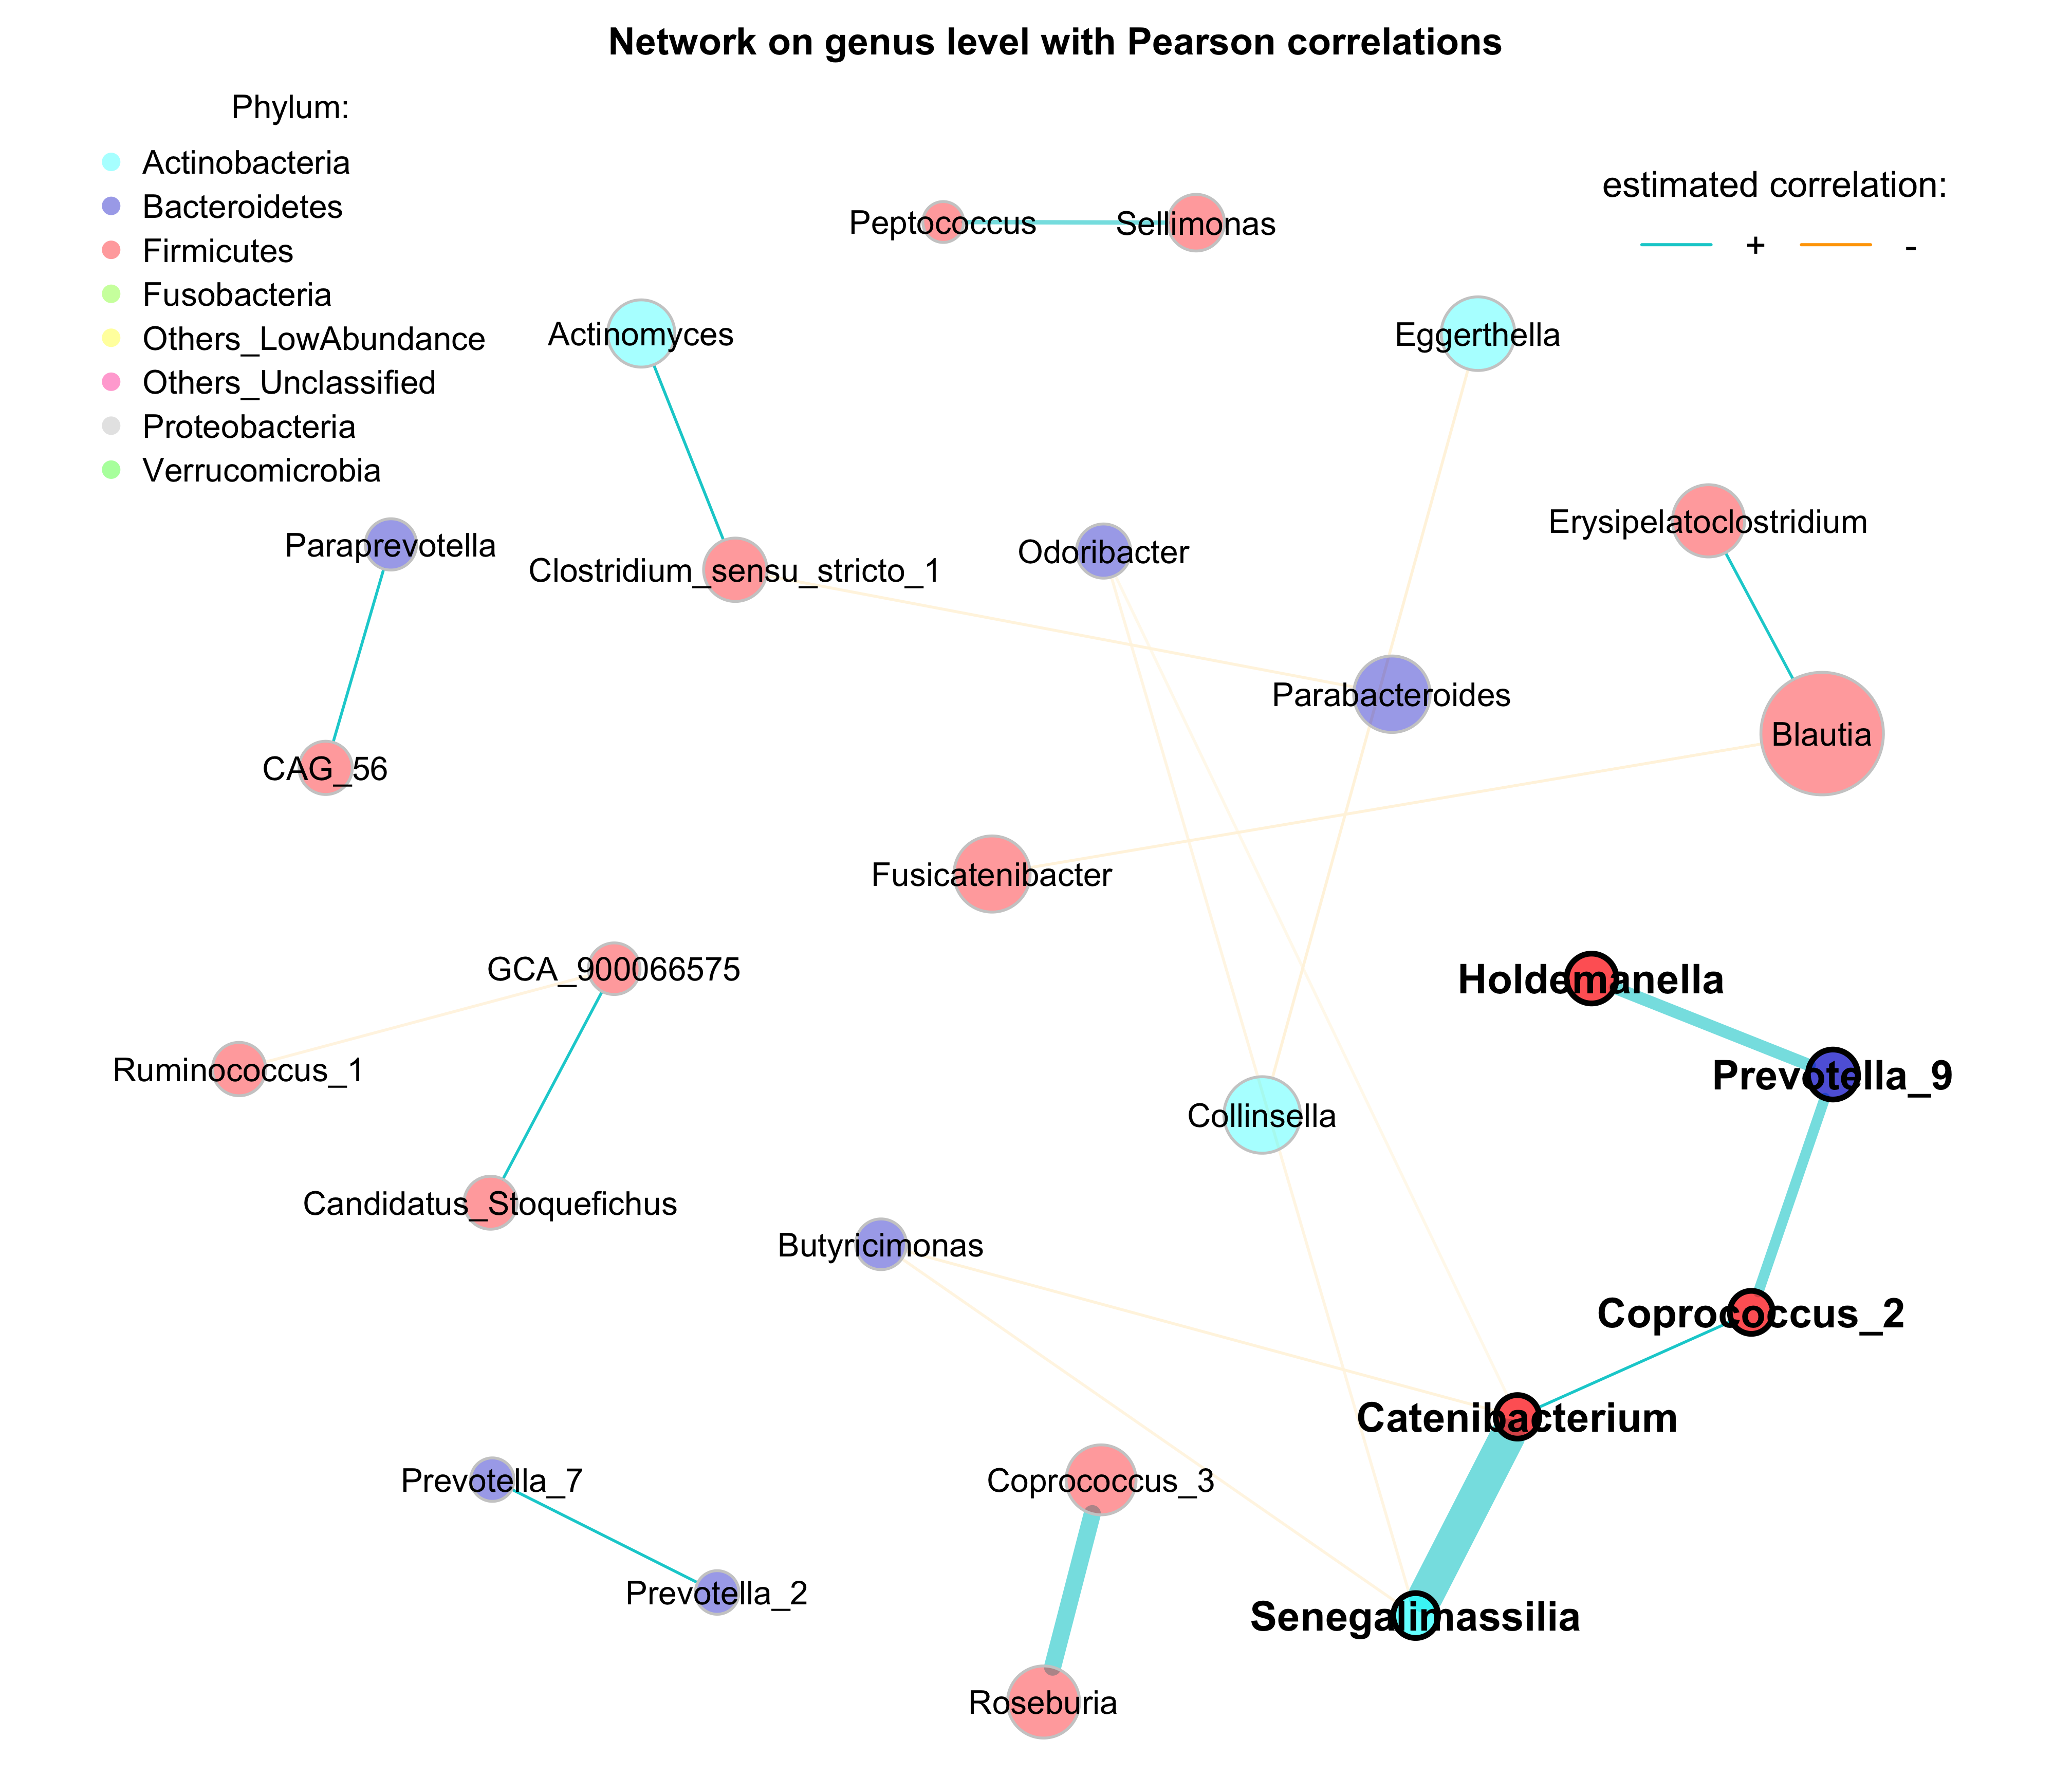 Network on 16s with Pearson correlations (Annotation)